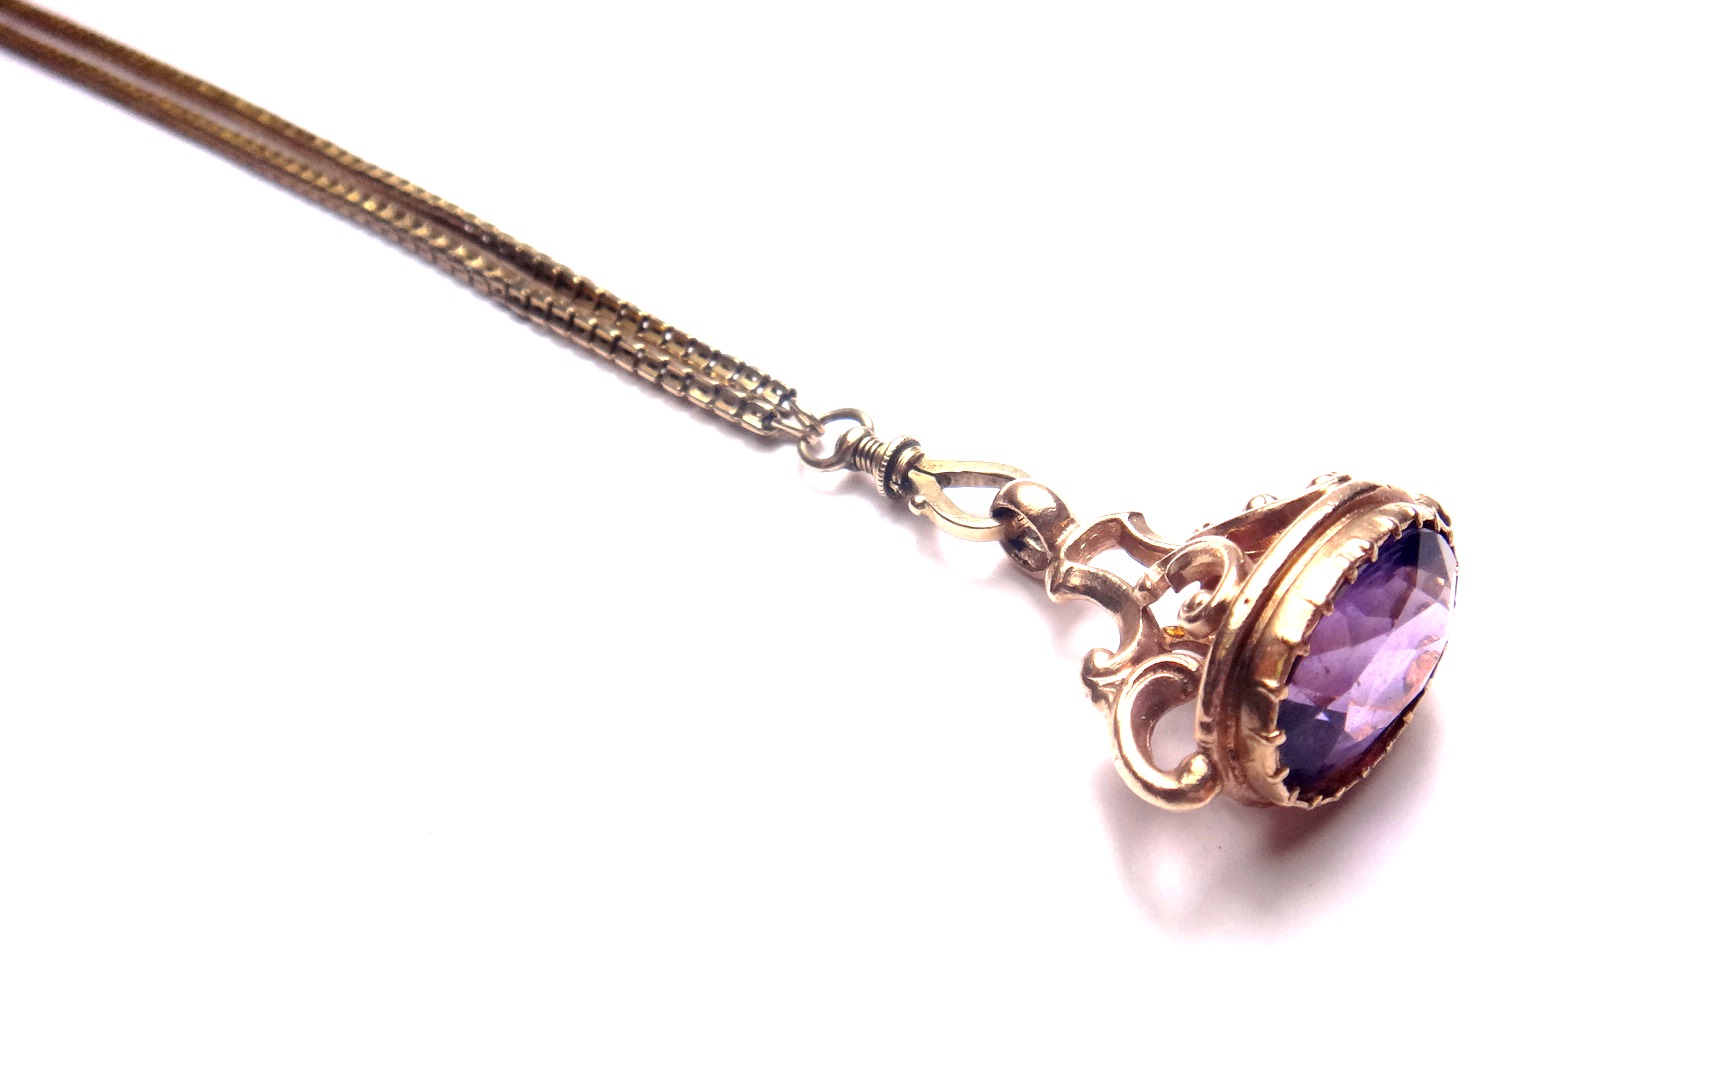 A Victorian gold long guard muff chain, the front mounted with a swivel, fitted with an amethyst set